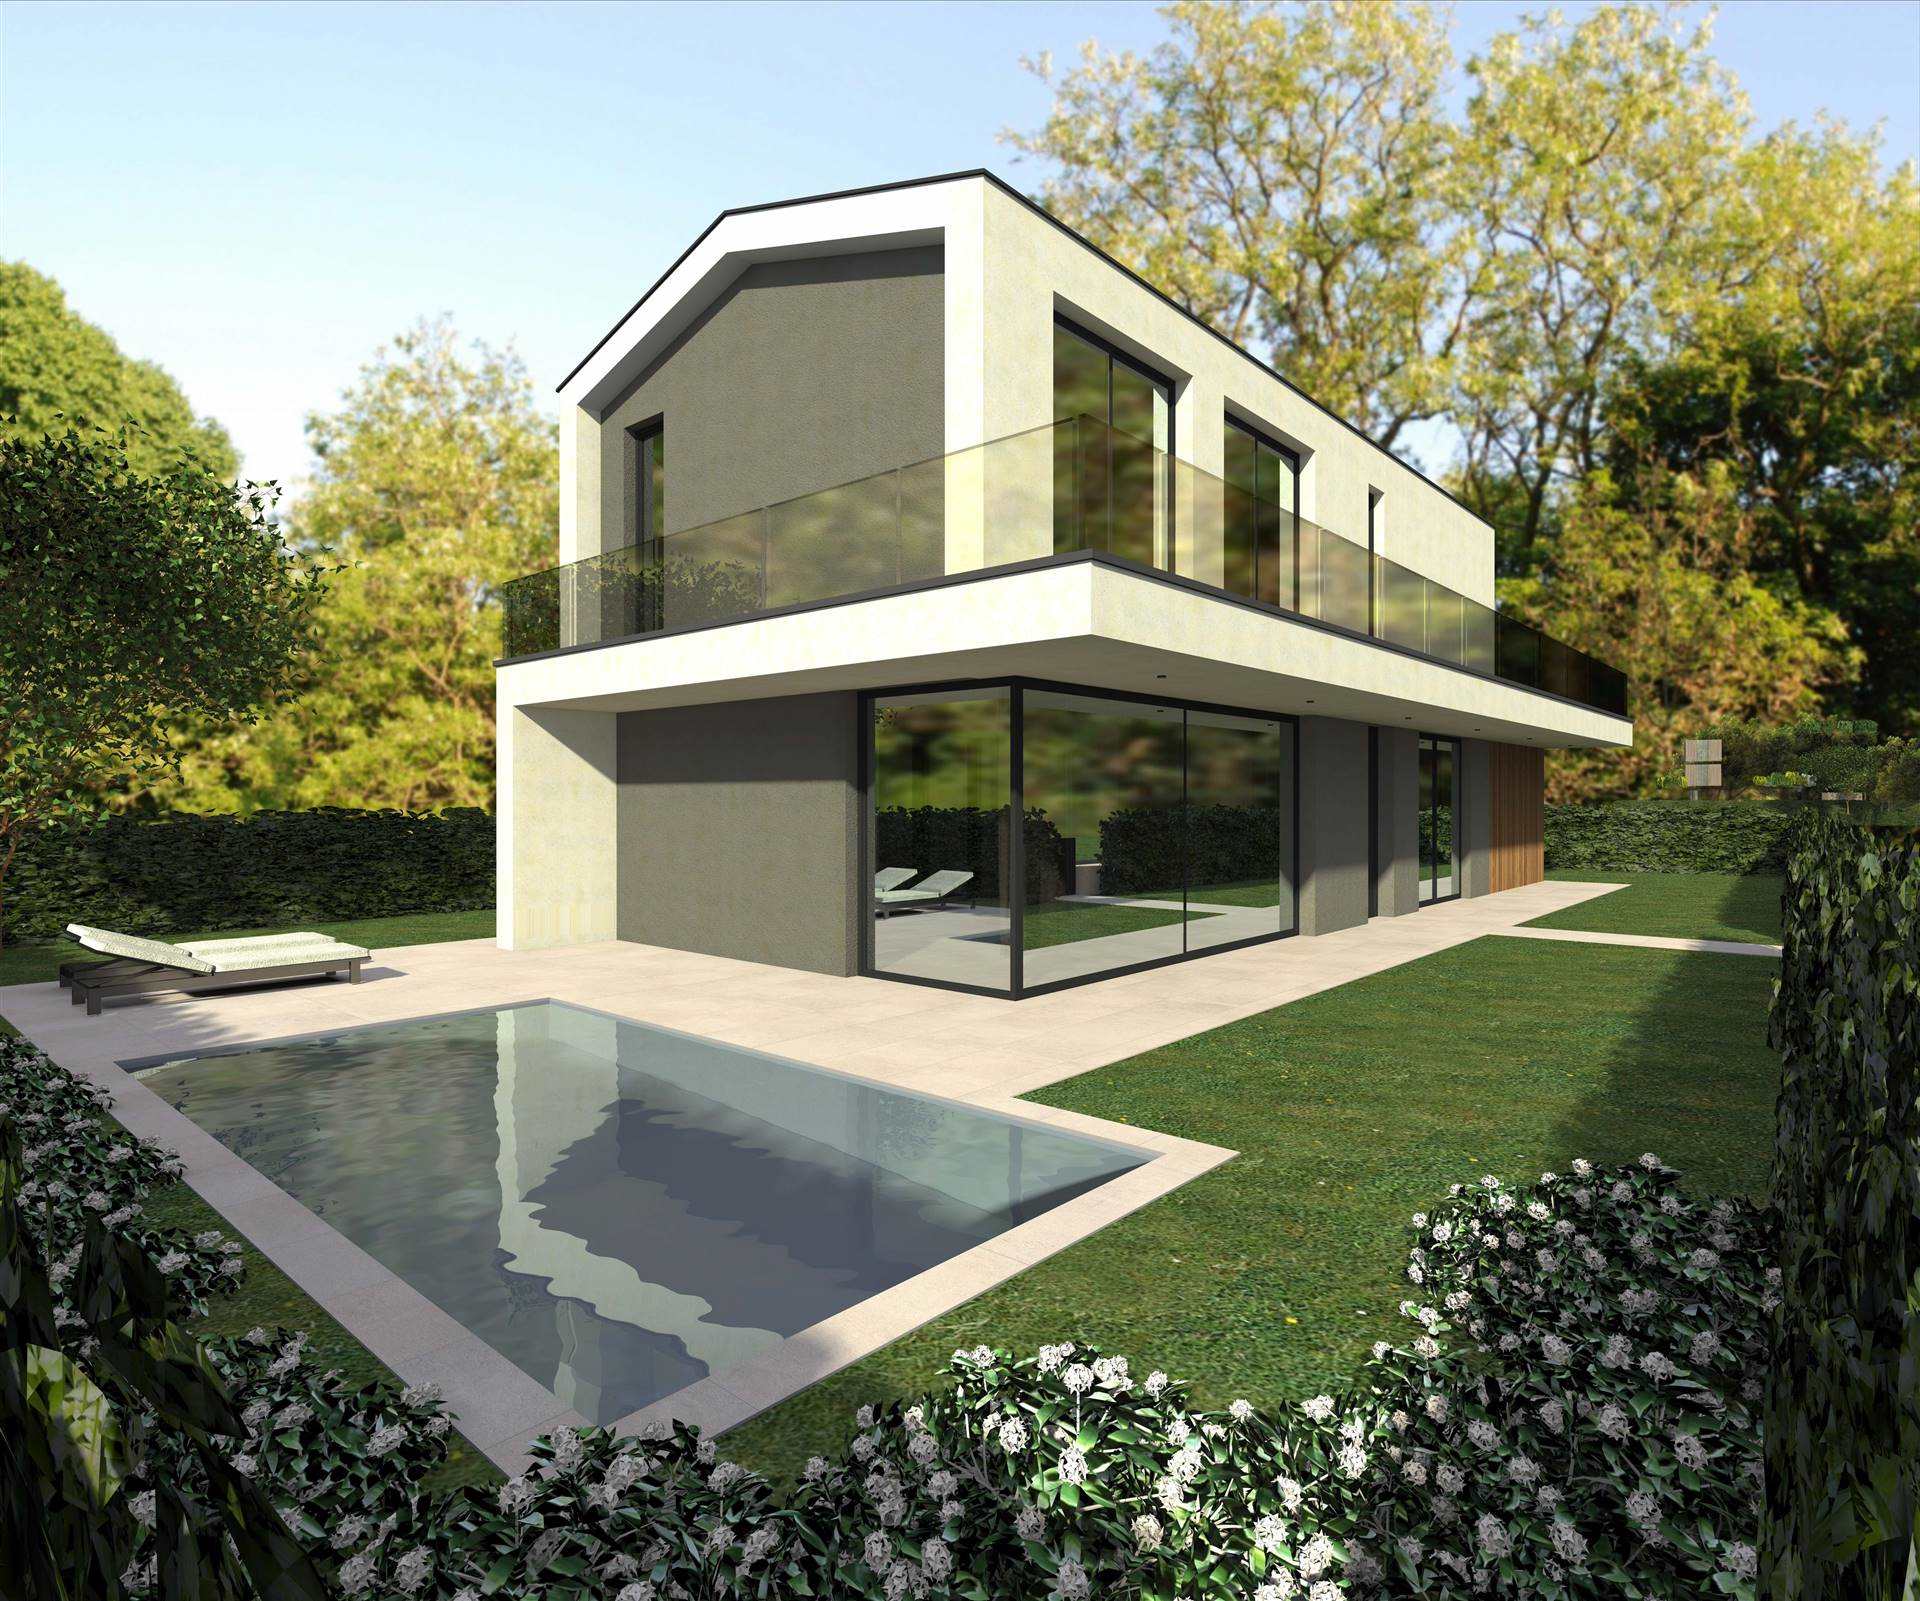 MANERBA DEL GARDA, Villa for sale, New construction, Heating Individual heating system, Energetic class: A+, composed by: 5 Rooms, , 3 Bedrooms, 3 Bathrooms, Price: € 595,000